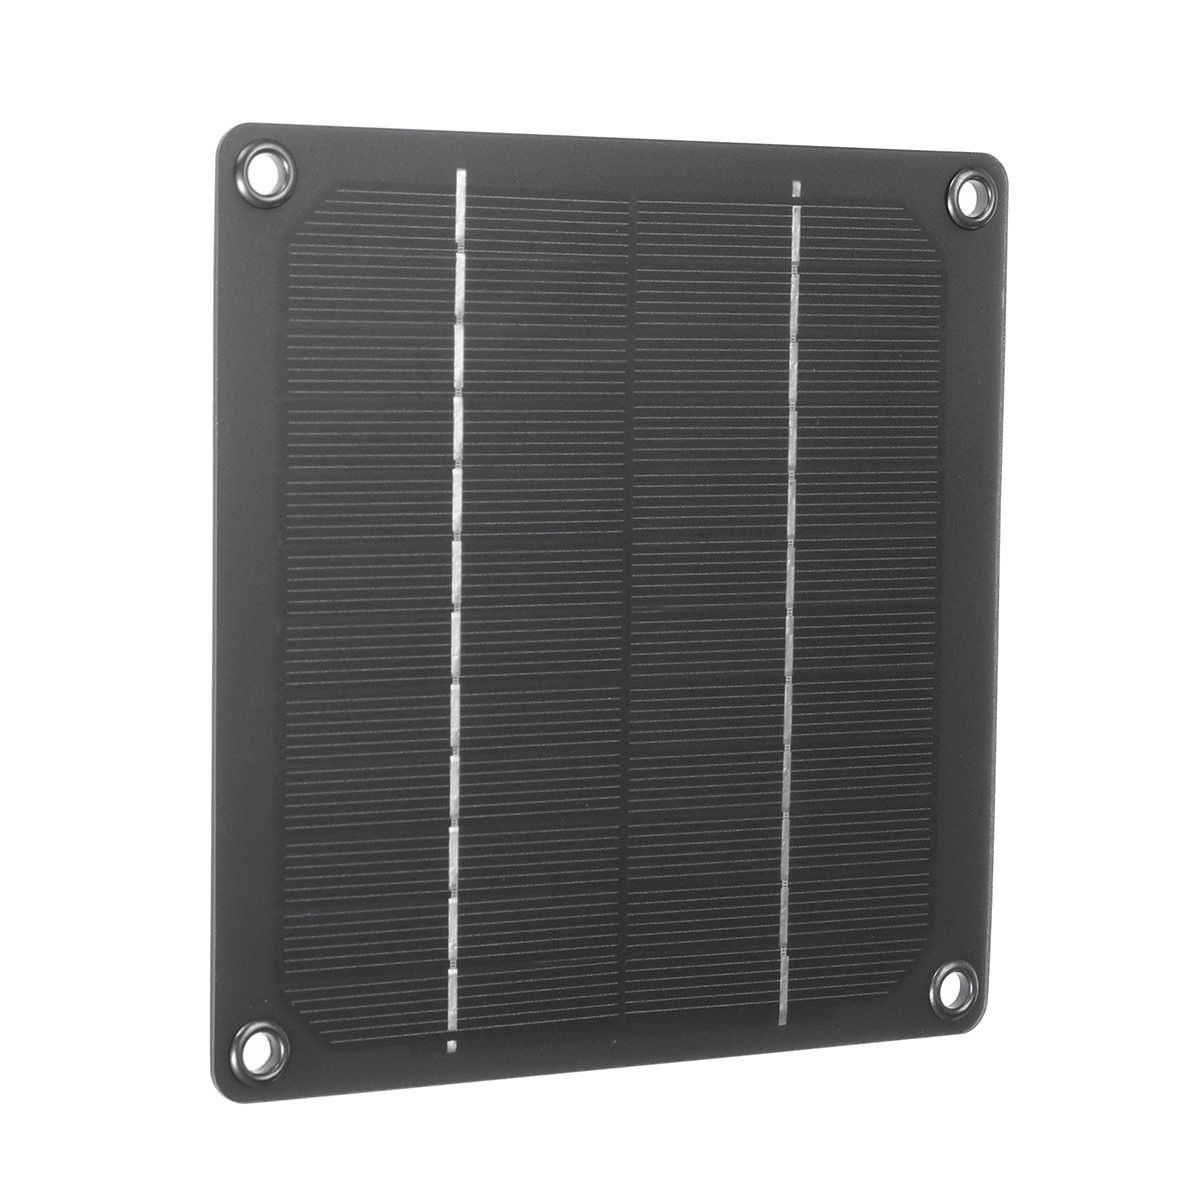 5W-Outdoor-Solar-Powered-Panel-Exhaust-Roof-Attic-Fan-For-Air-Ventilation-Vent-1919375-4